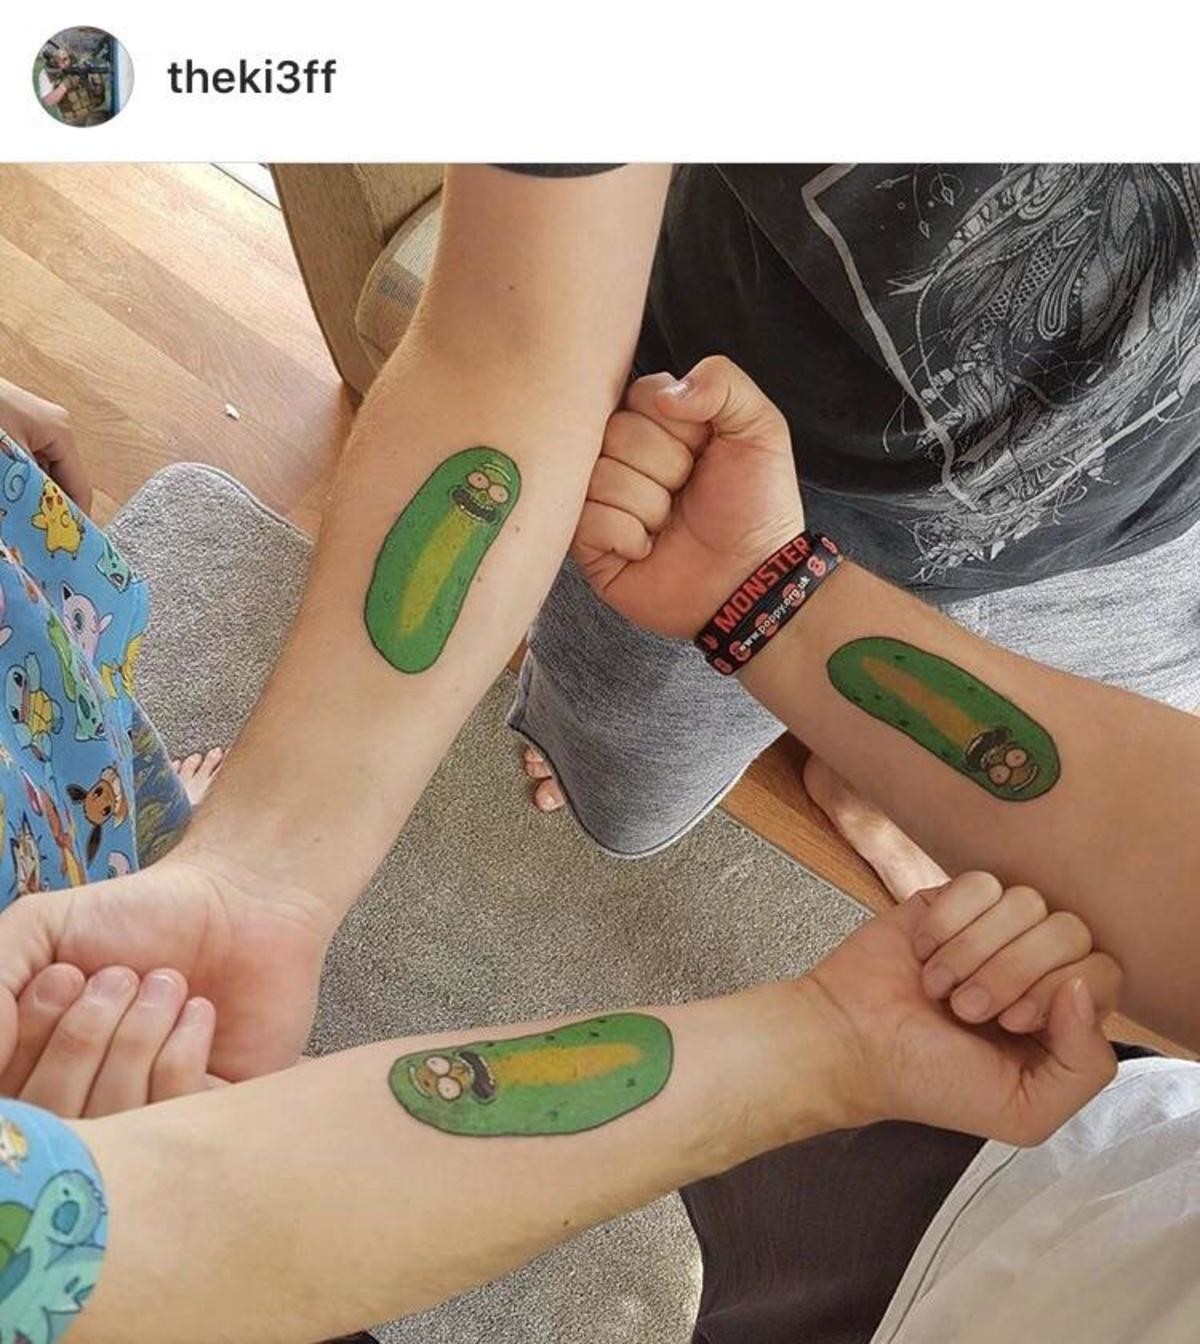 Portland Pickles on Twitter Tattoo Tuesday Were giving away free REAL  tattoos tonight at our game This weeks design The Pickle Jar Rsvp for  tattoo must have tickets to tonights game through